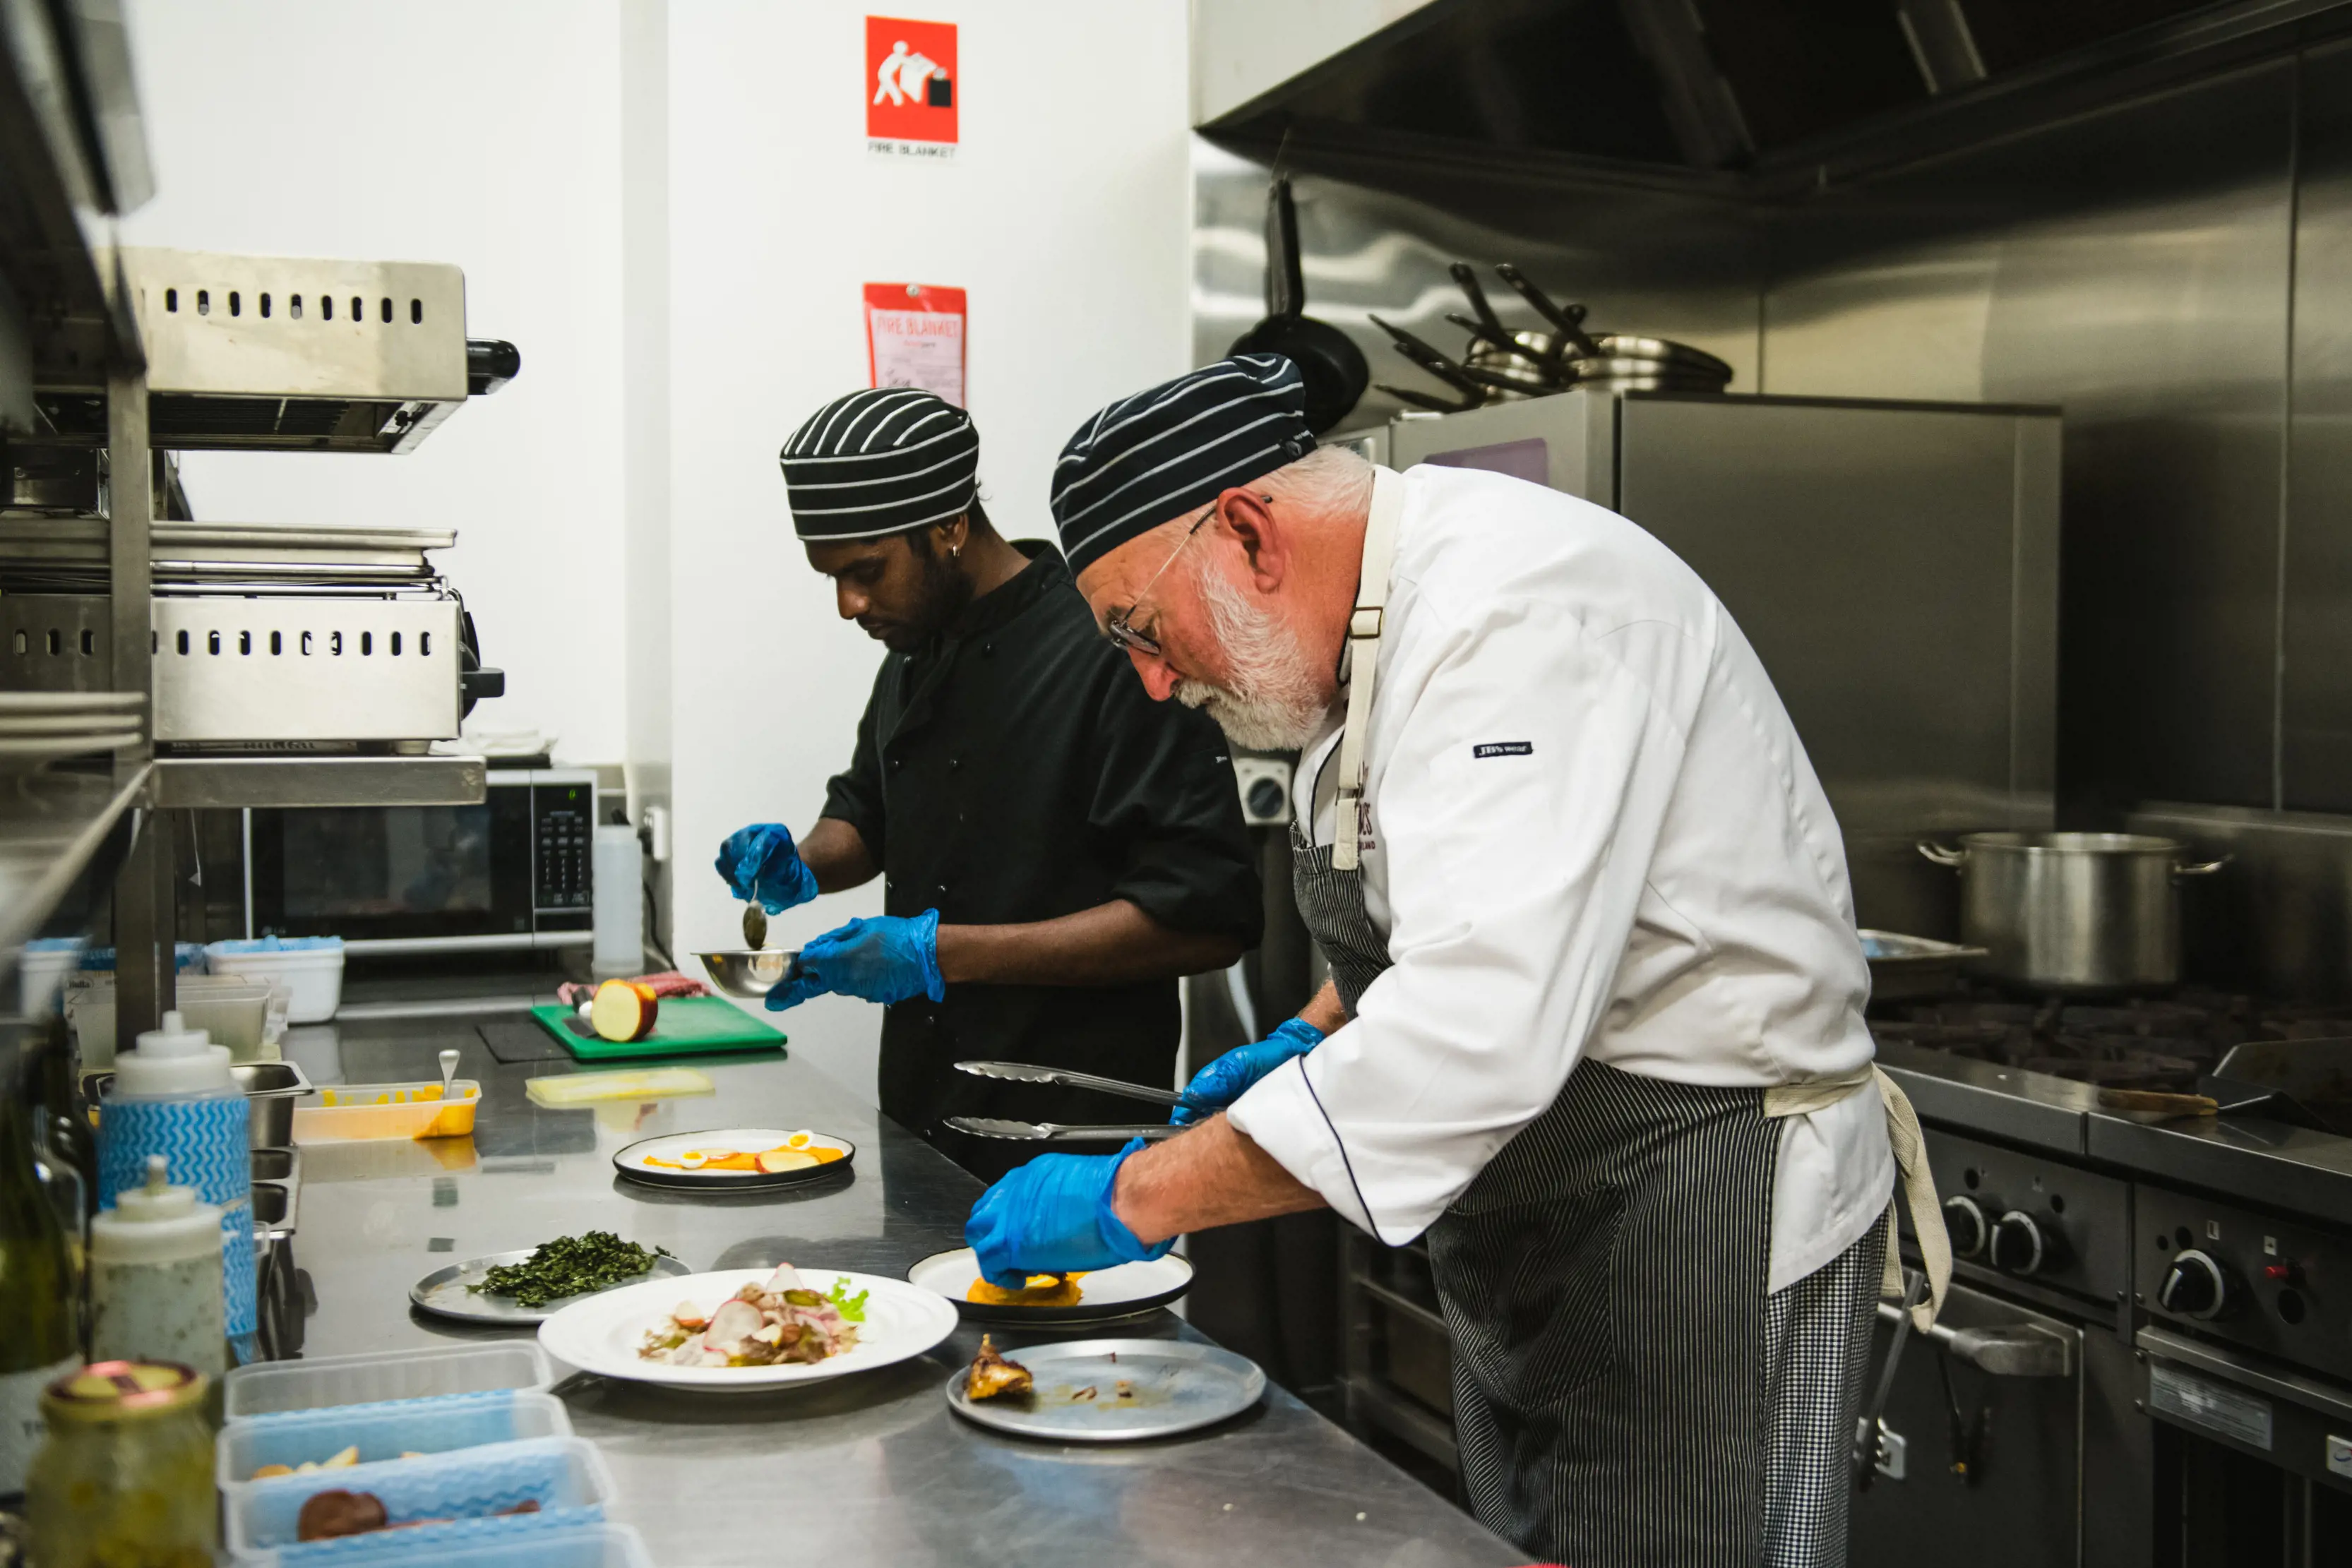 Two chefs in the kitchen, preparing food at the Wild Harvest Restaurant and Cooking School.